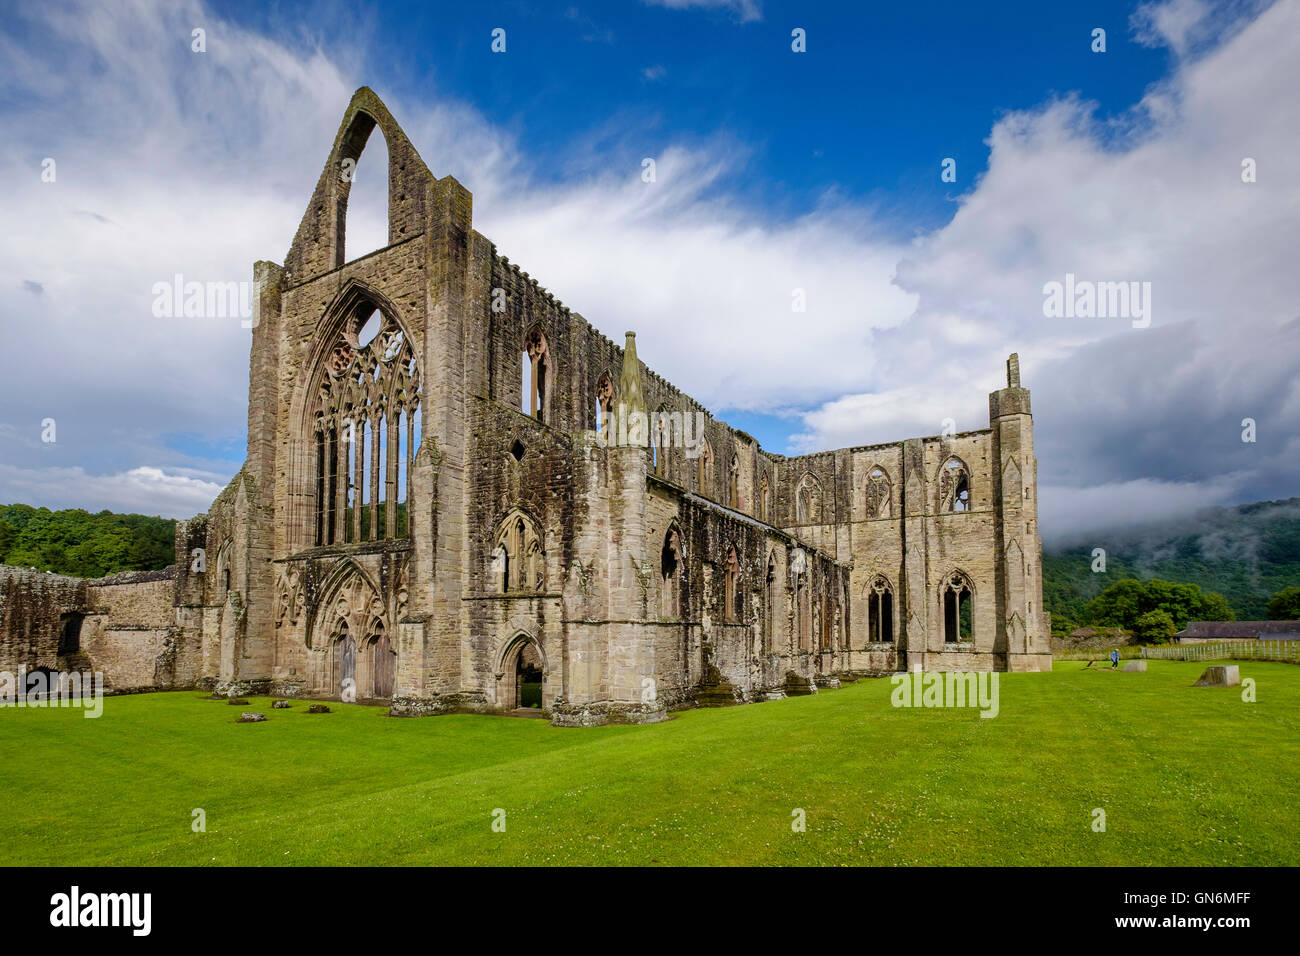 Tintern Abbey near village of Tintern, Monmouthshire Wales UK. on bank of River Wye.Founded in 1131by Walter de Clare. Tourists Stock Photo